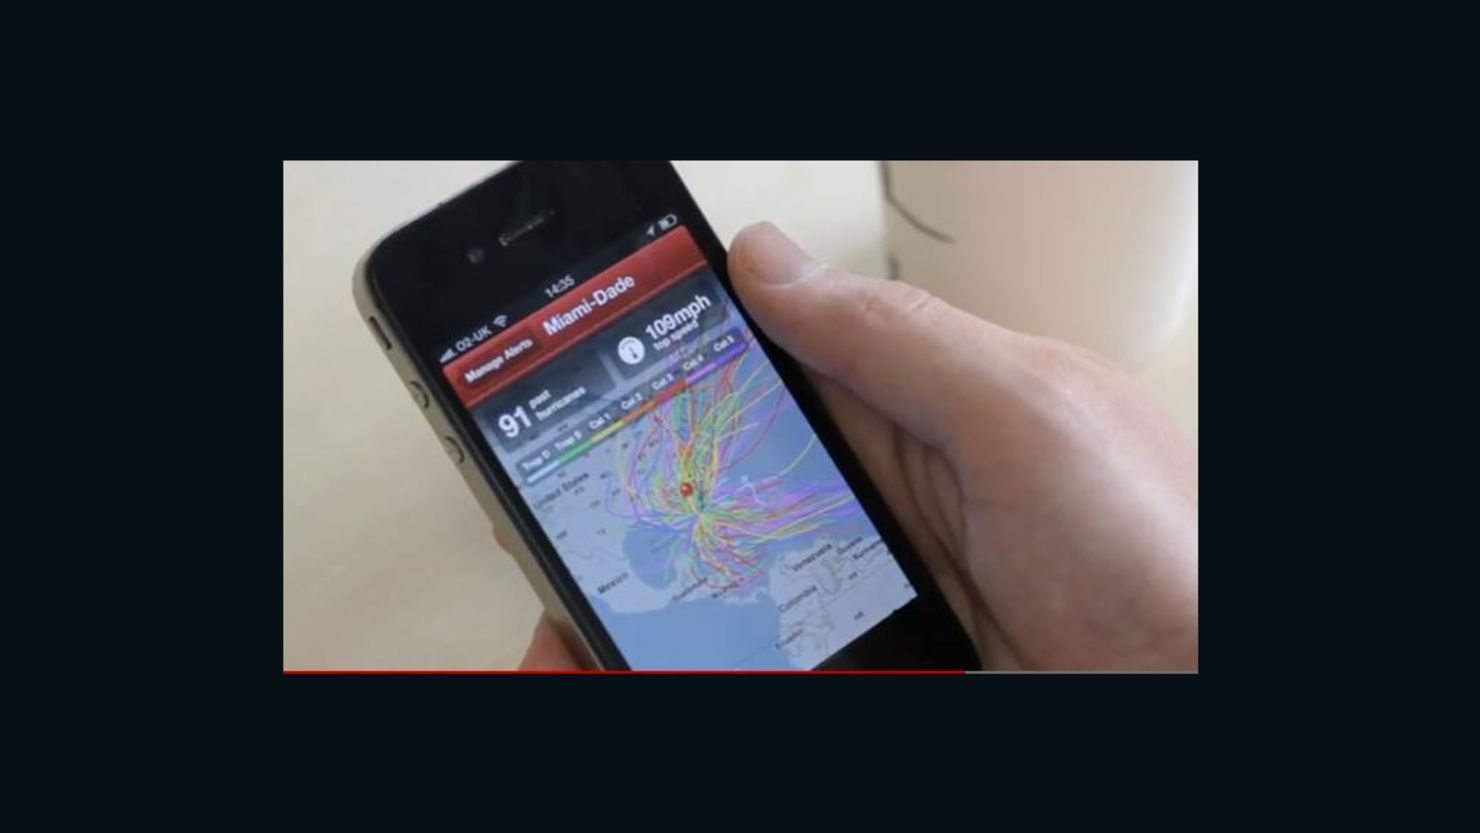 The Red Cross hurricane app lets you track activity and gives tips on storm preparedness.